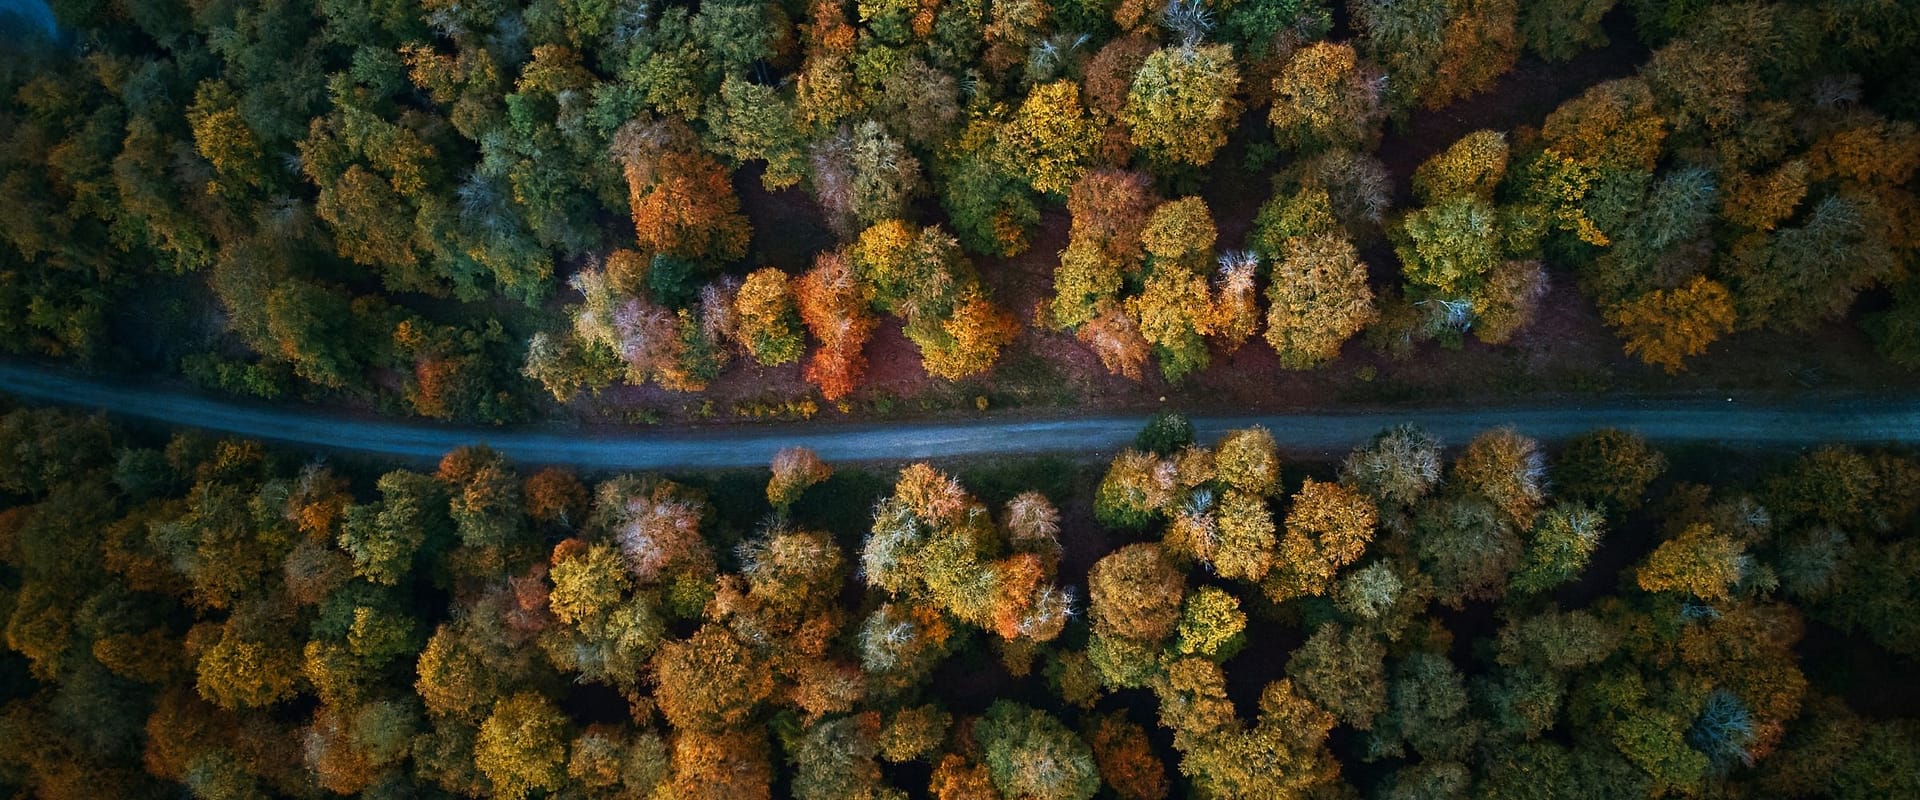 Drone photograph above street with forest on both sides.